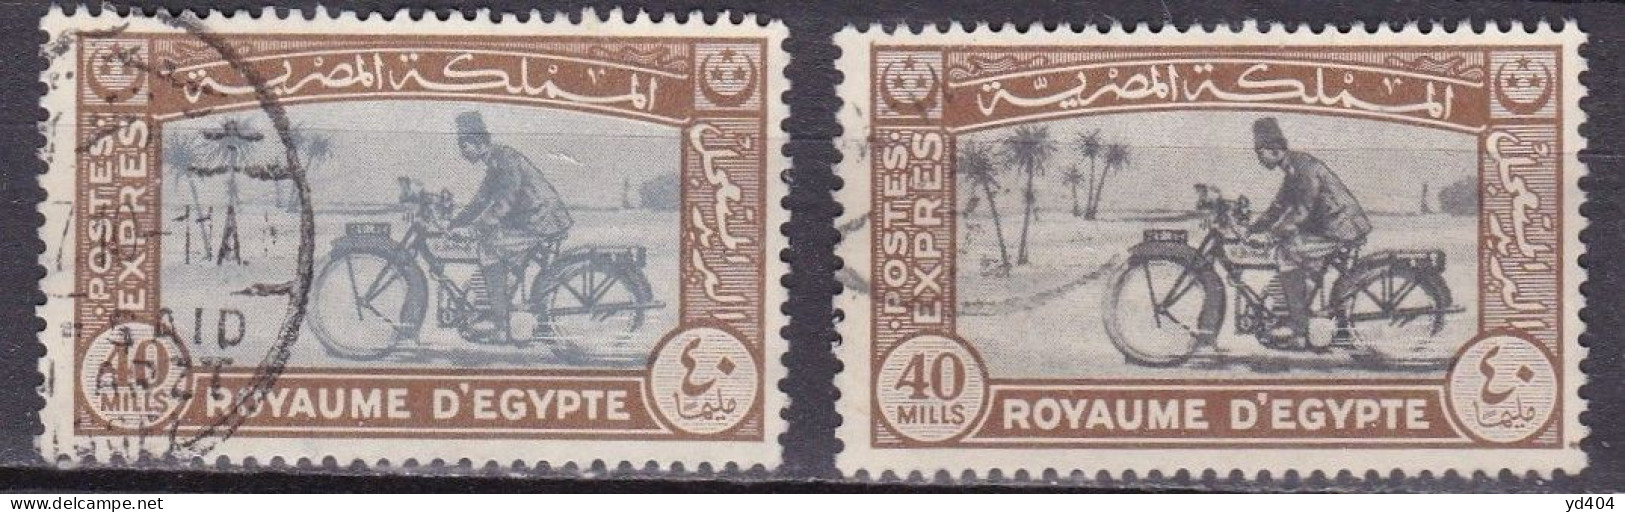 EG905 – EGYPTE – EGYPT – EXPRESS – 1944 – MOTORCYCLE POSTMAN – Y&T # 4(x2) USED 12 € - Used Stamps